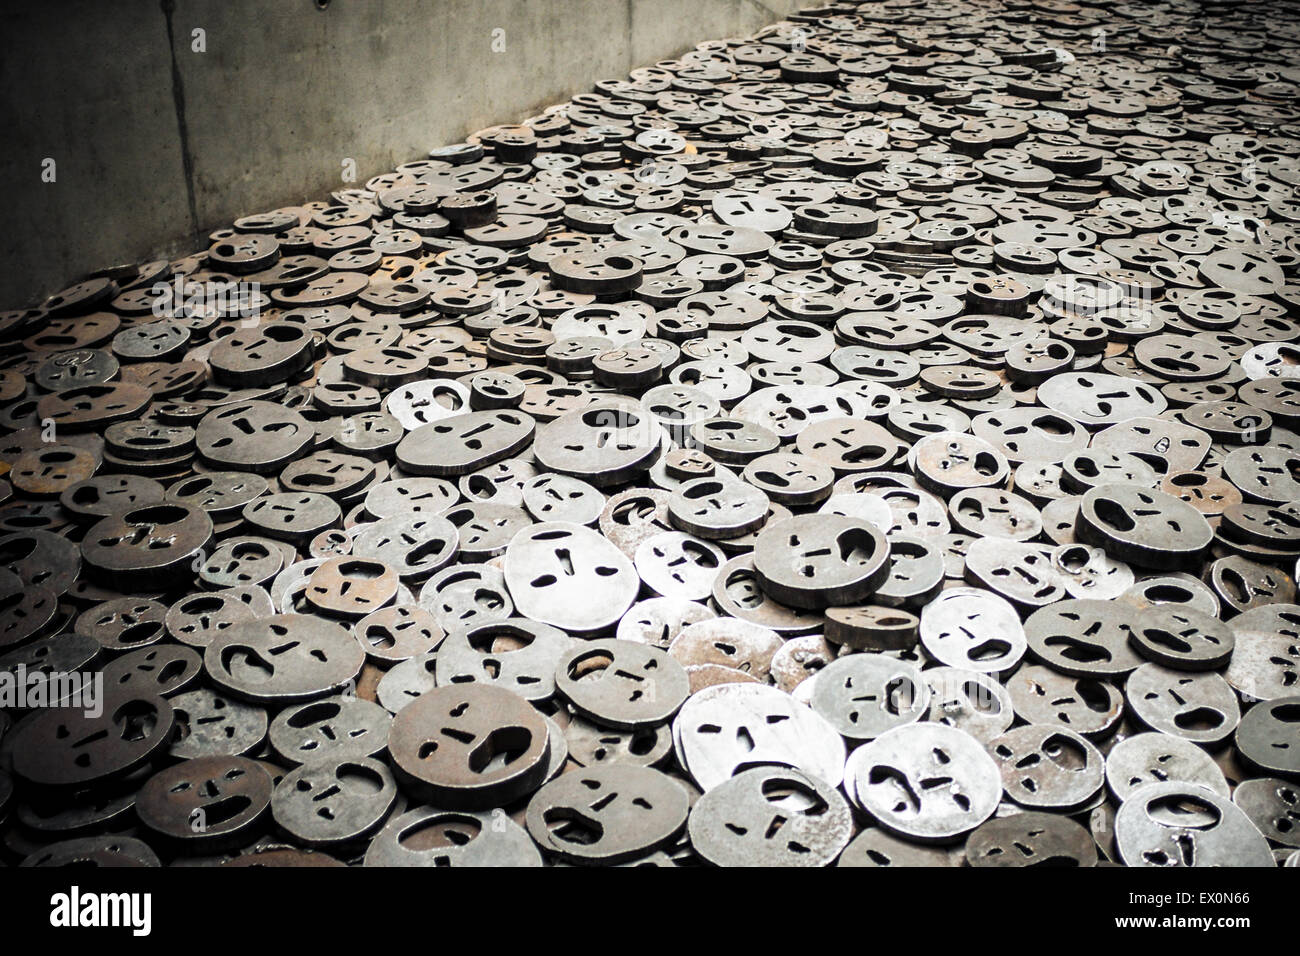 Memory Void Cast Iron Faces exhibition at the Jewish Holocaust Museum in Berlin Stock Photo